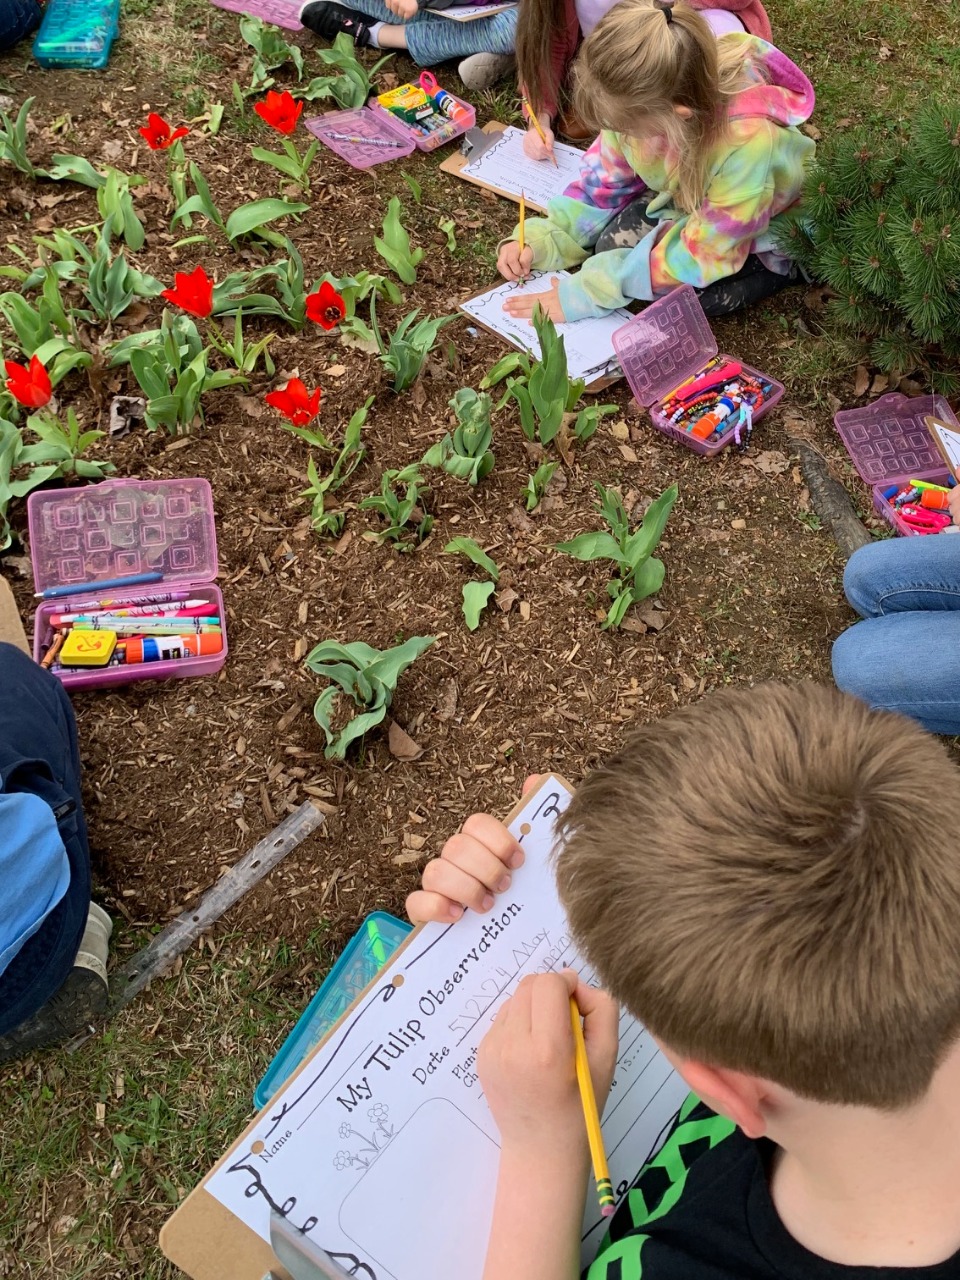 A group of second graders writes on paper sitting around group of blooming tulips